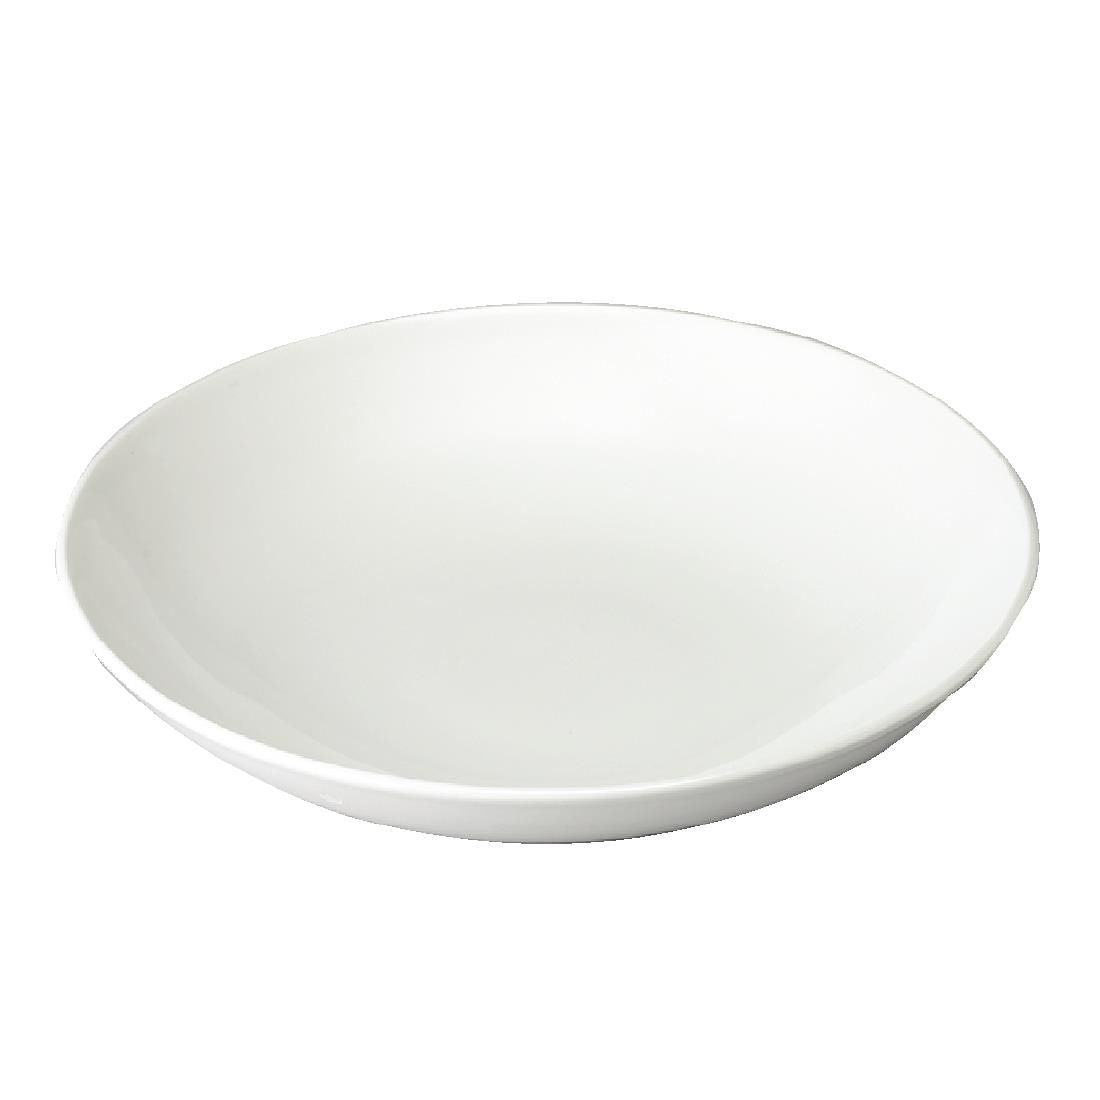 Churchill Evolve Coupe Pasta Bowls White 248mm (Pack of 12) JD Catering Equipment Solutions Ltd